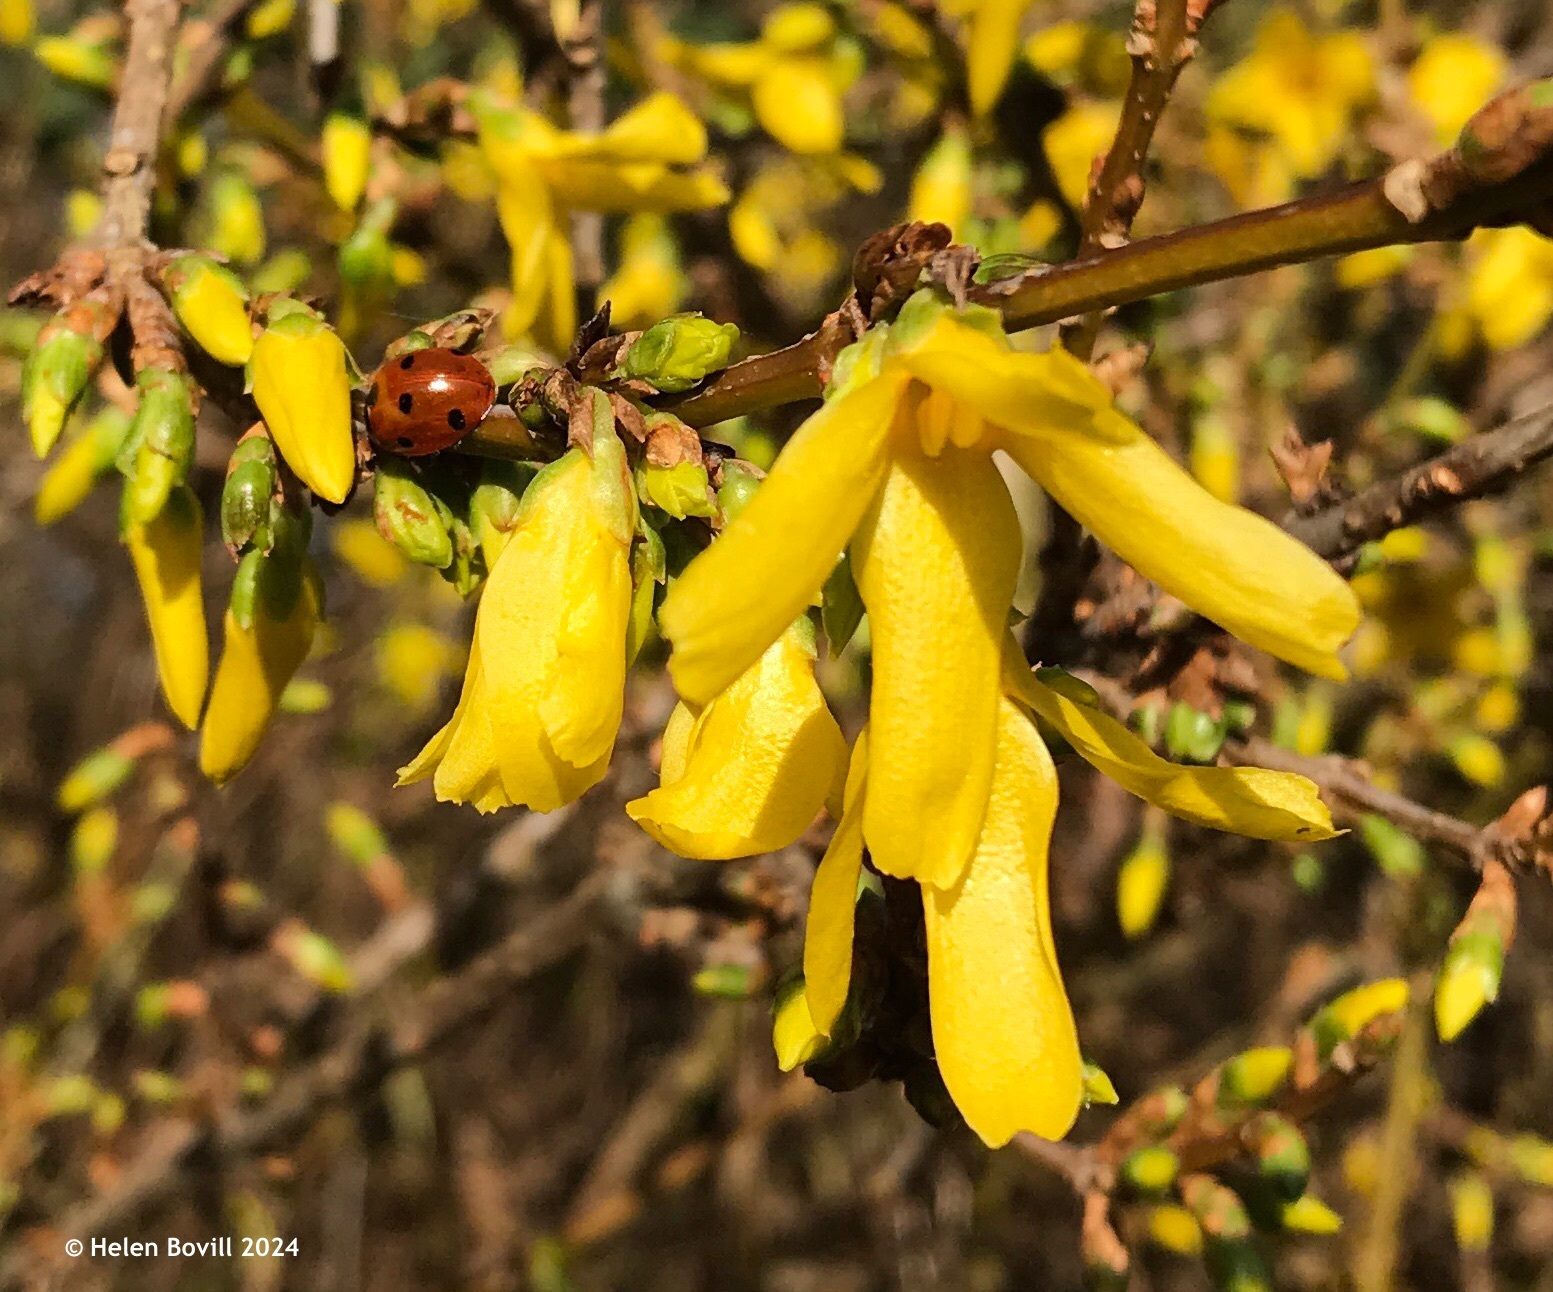 The bright yellow flowers of the Forsythia with a small 7-spot ladybird on the branch